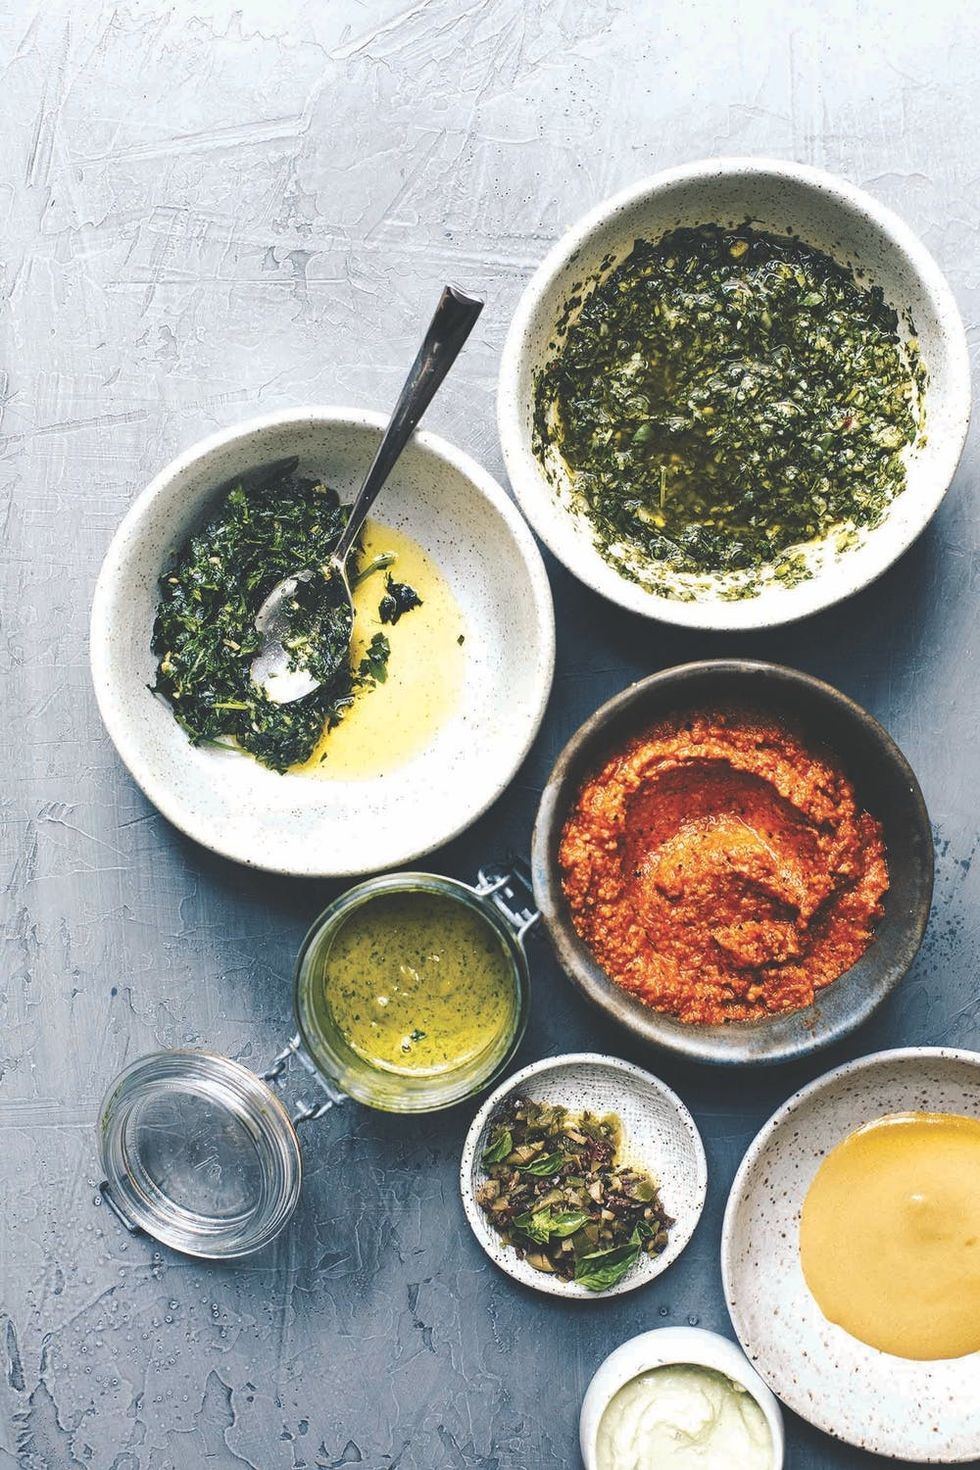 Condiments are king in the More with Less cookbook.